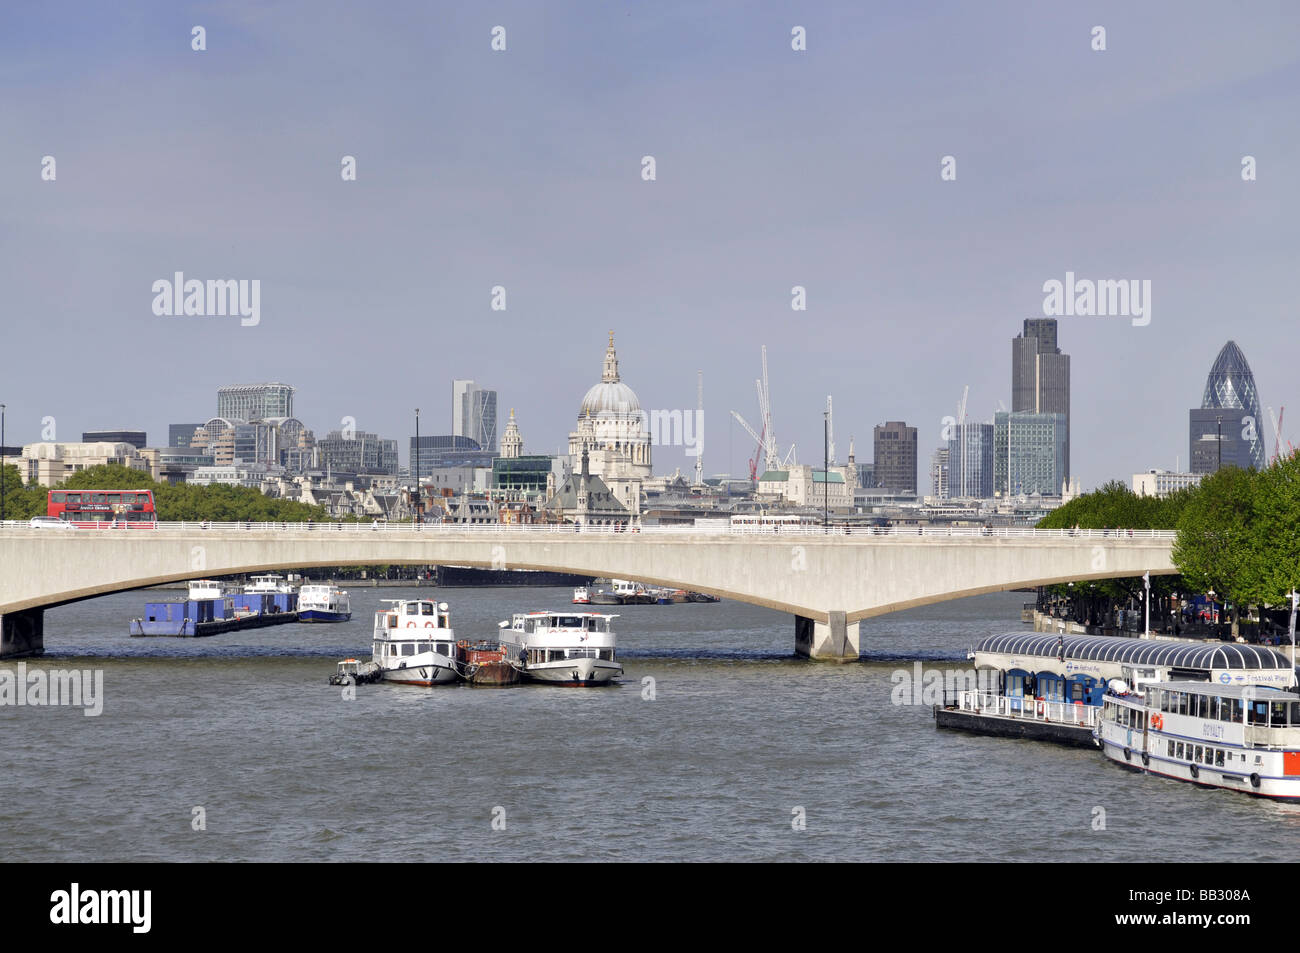 London city skyline from the Thames Stock Photo